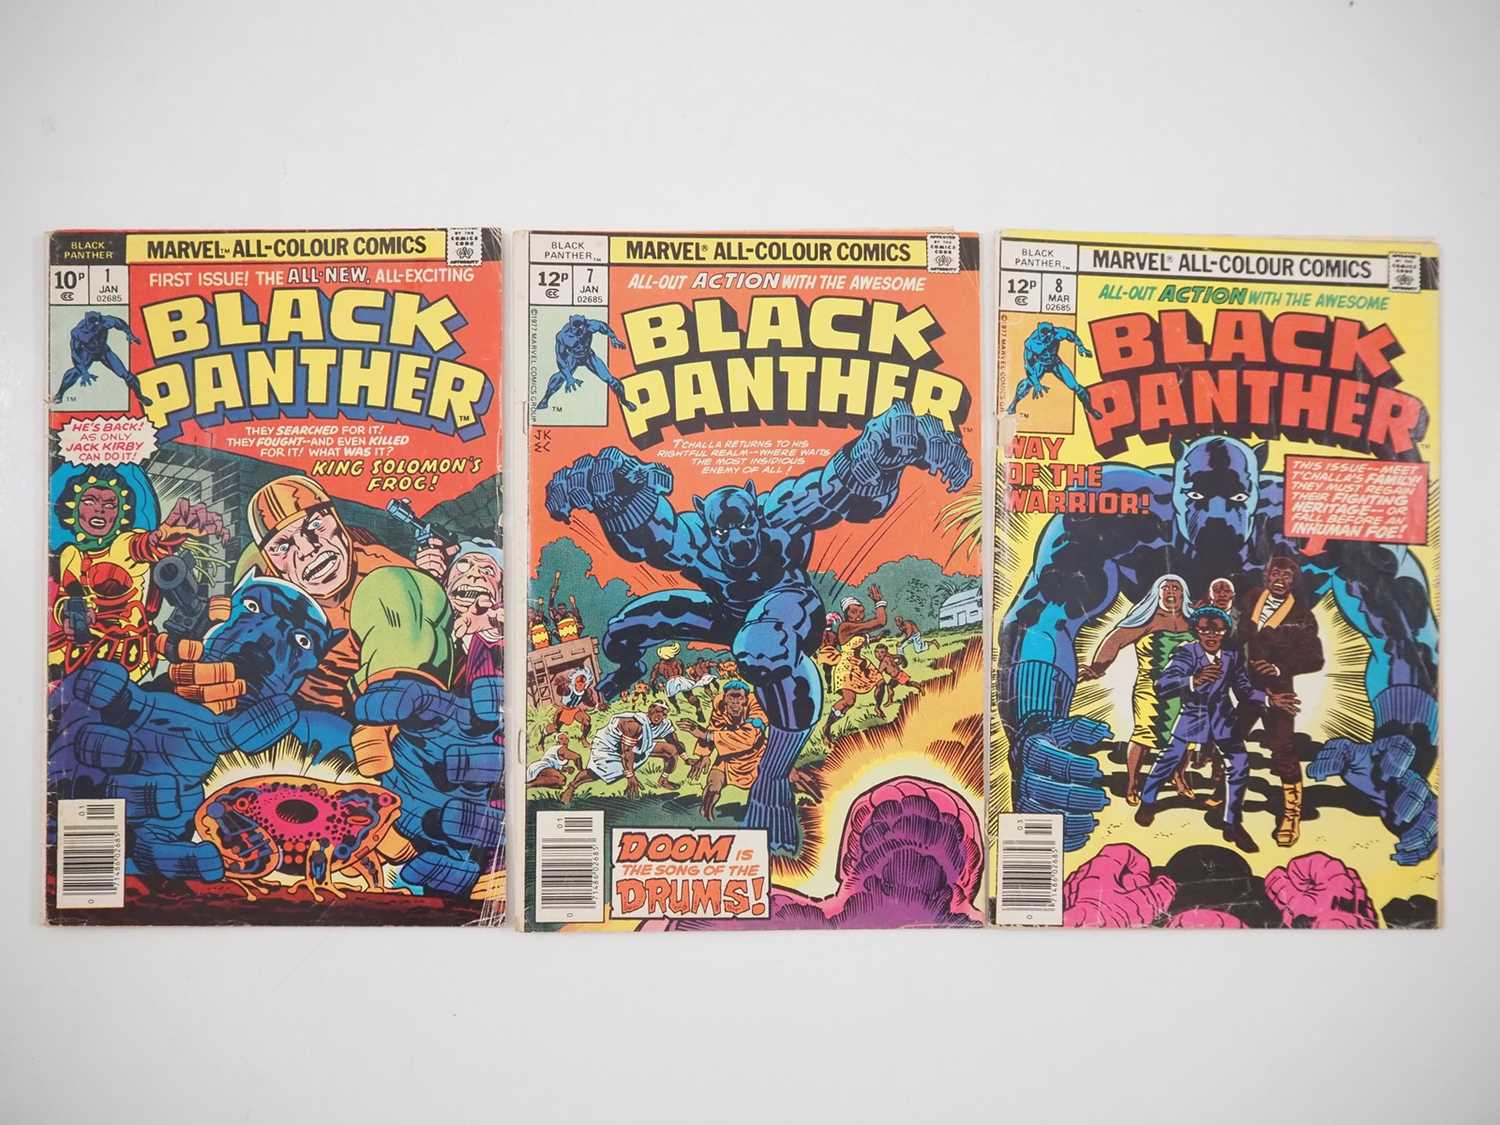 BLACK PANTHER #1, 7, 8 (3 in Lot) - (1977/1978 - MARVEL - UK Price Variant) - HOT Character +